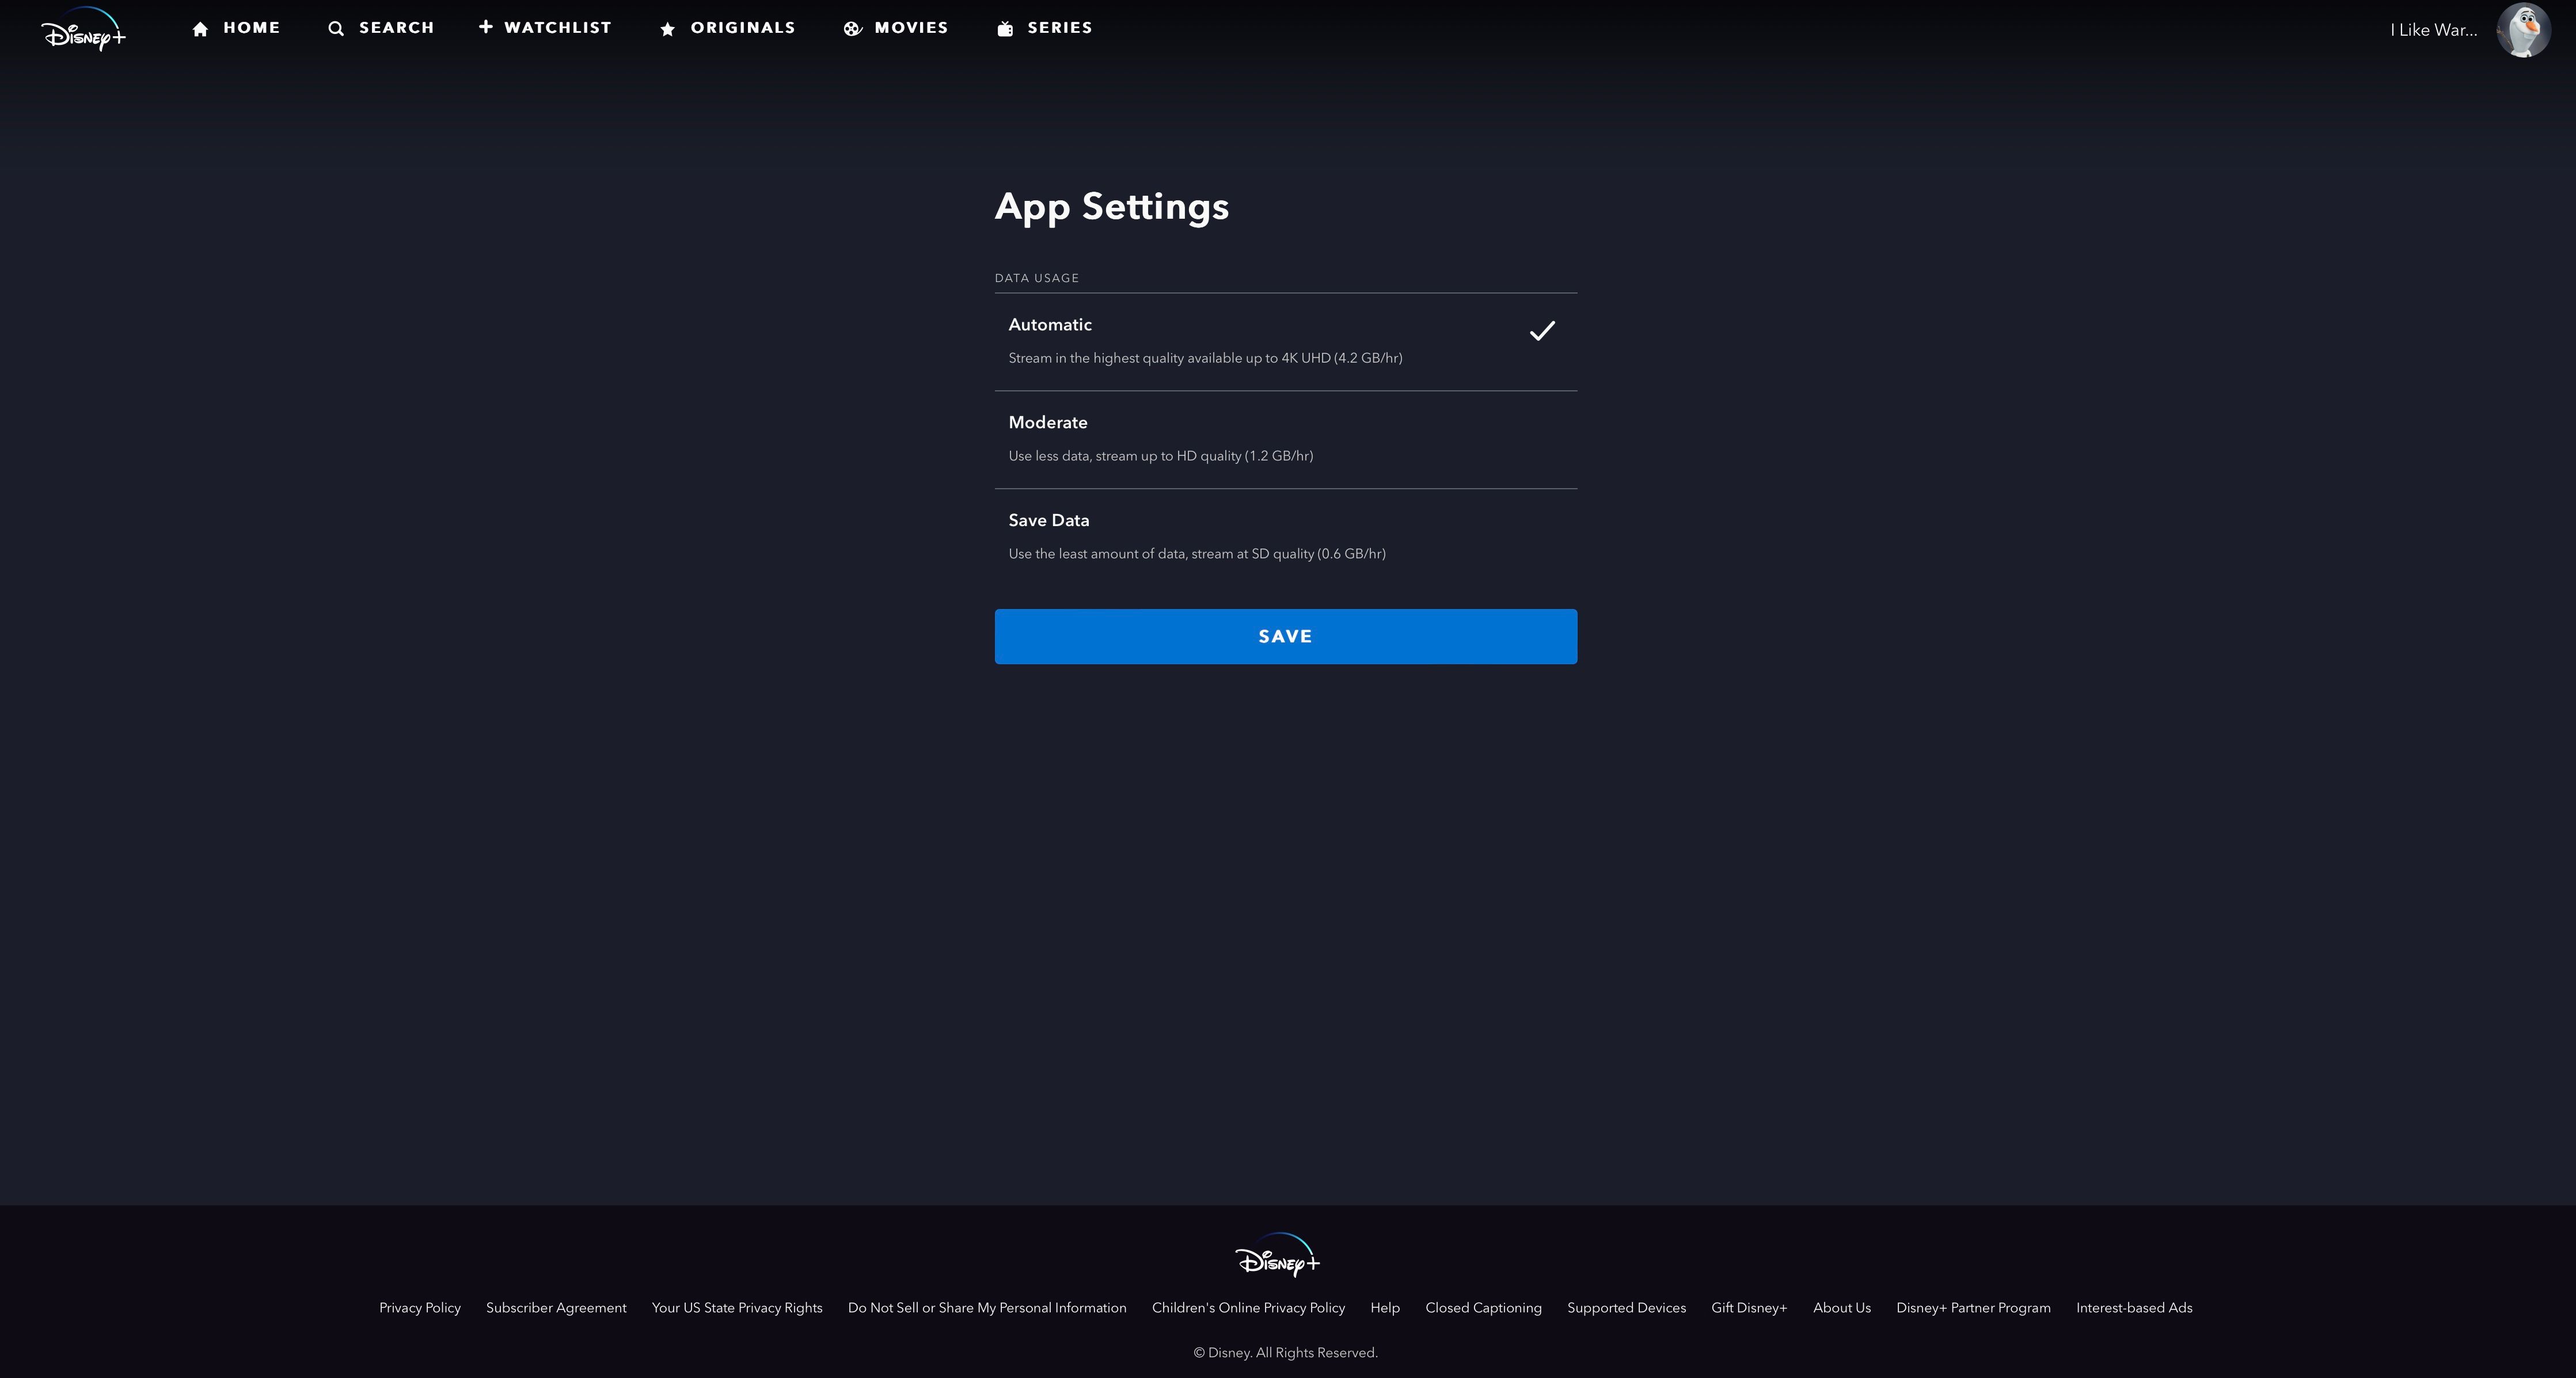 Disney+ App Settings page with save button